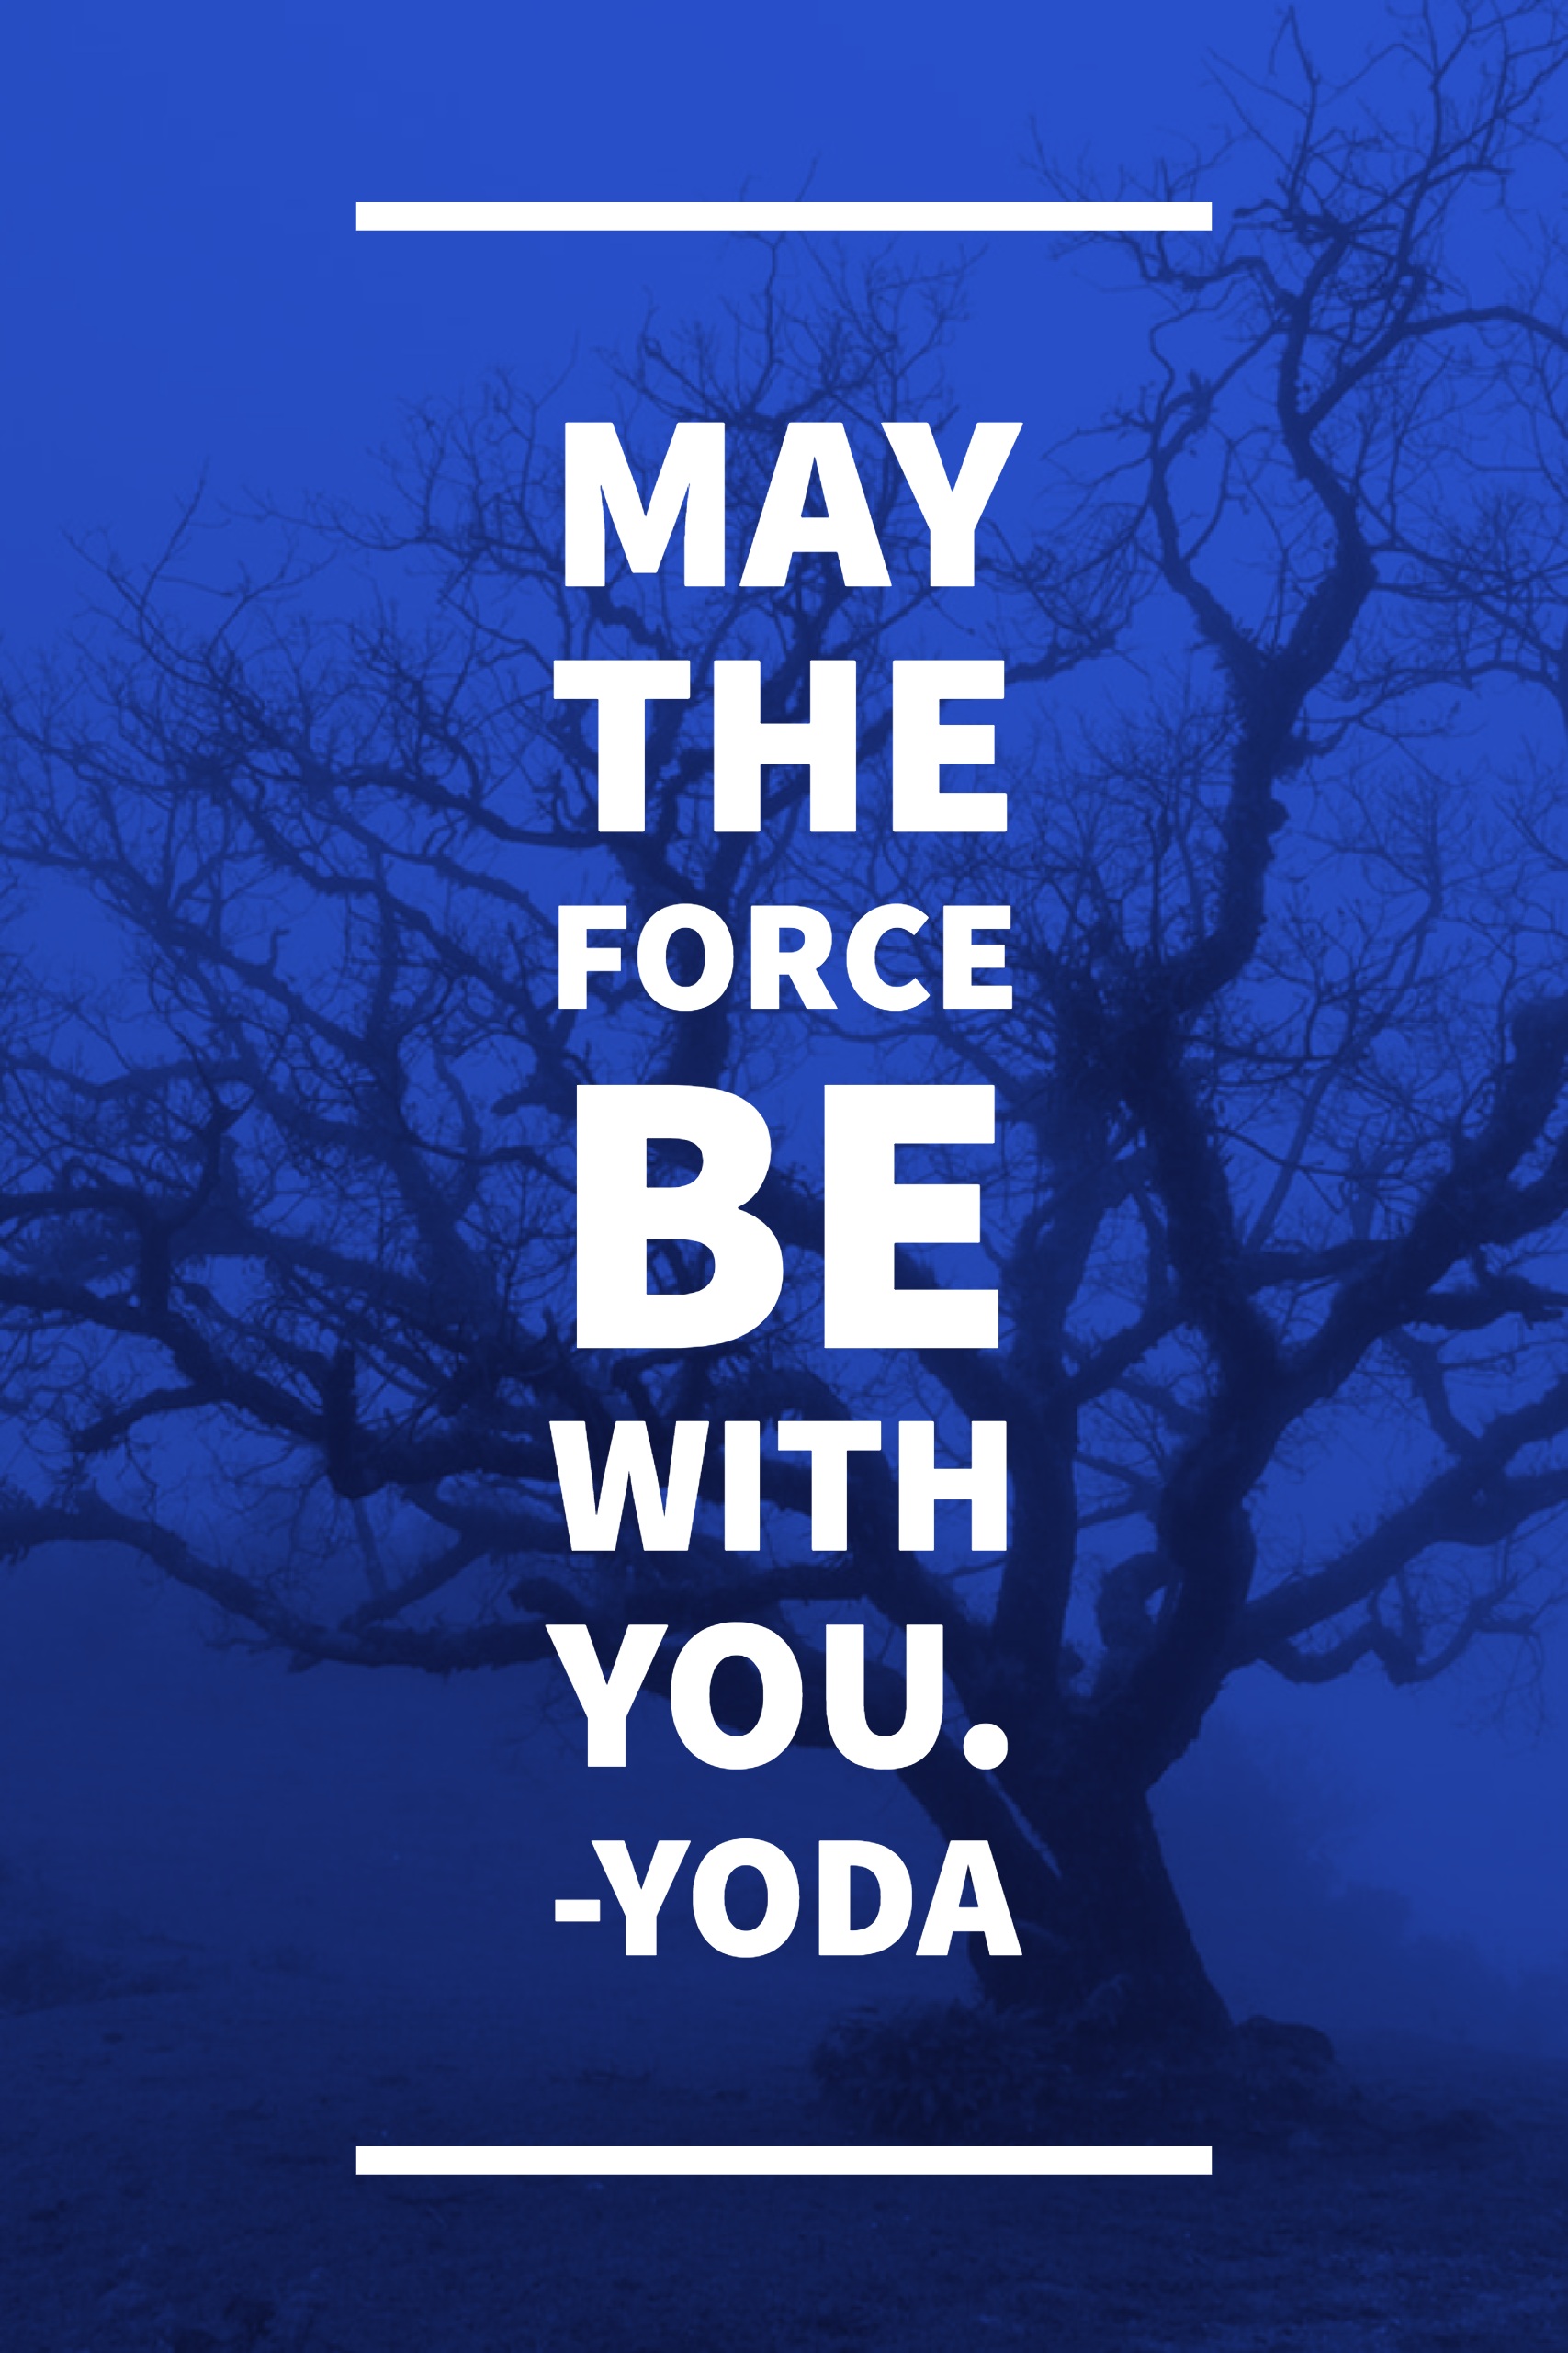 May the Force be with you.-Yoda